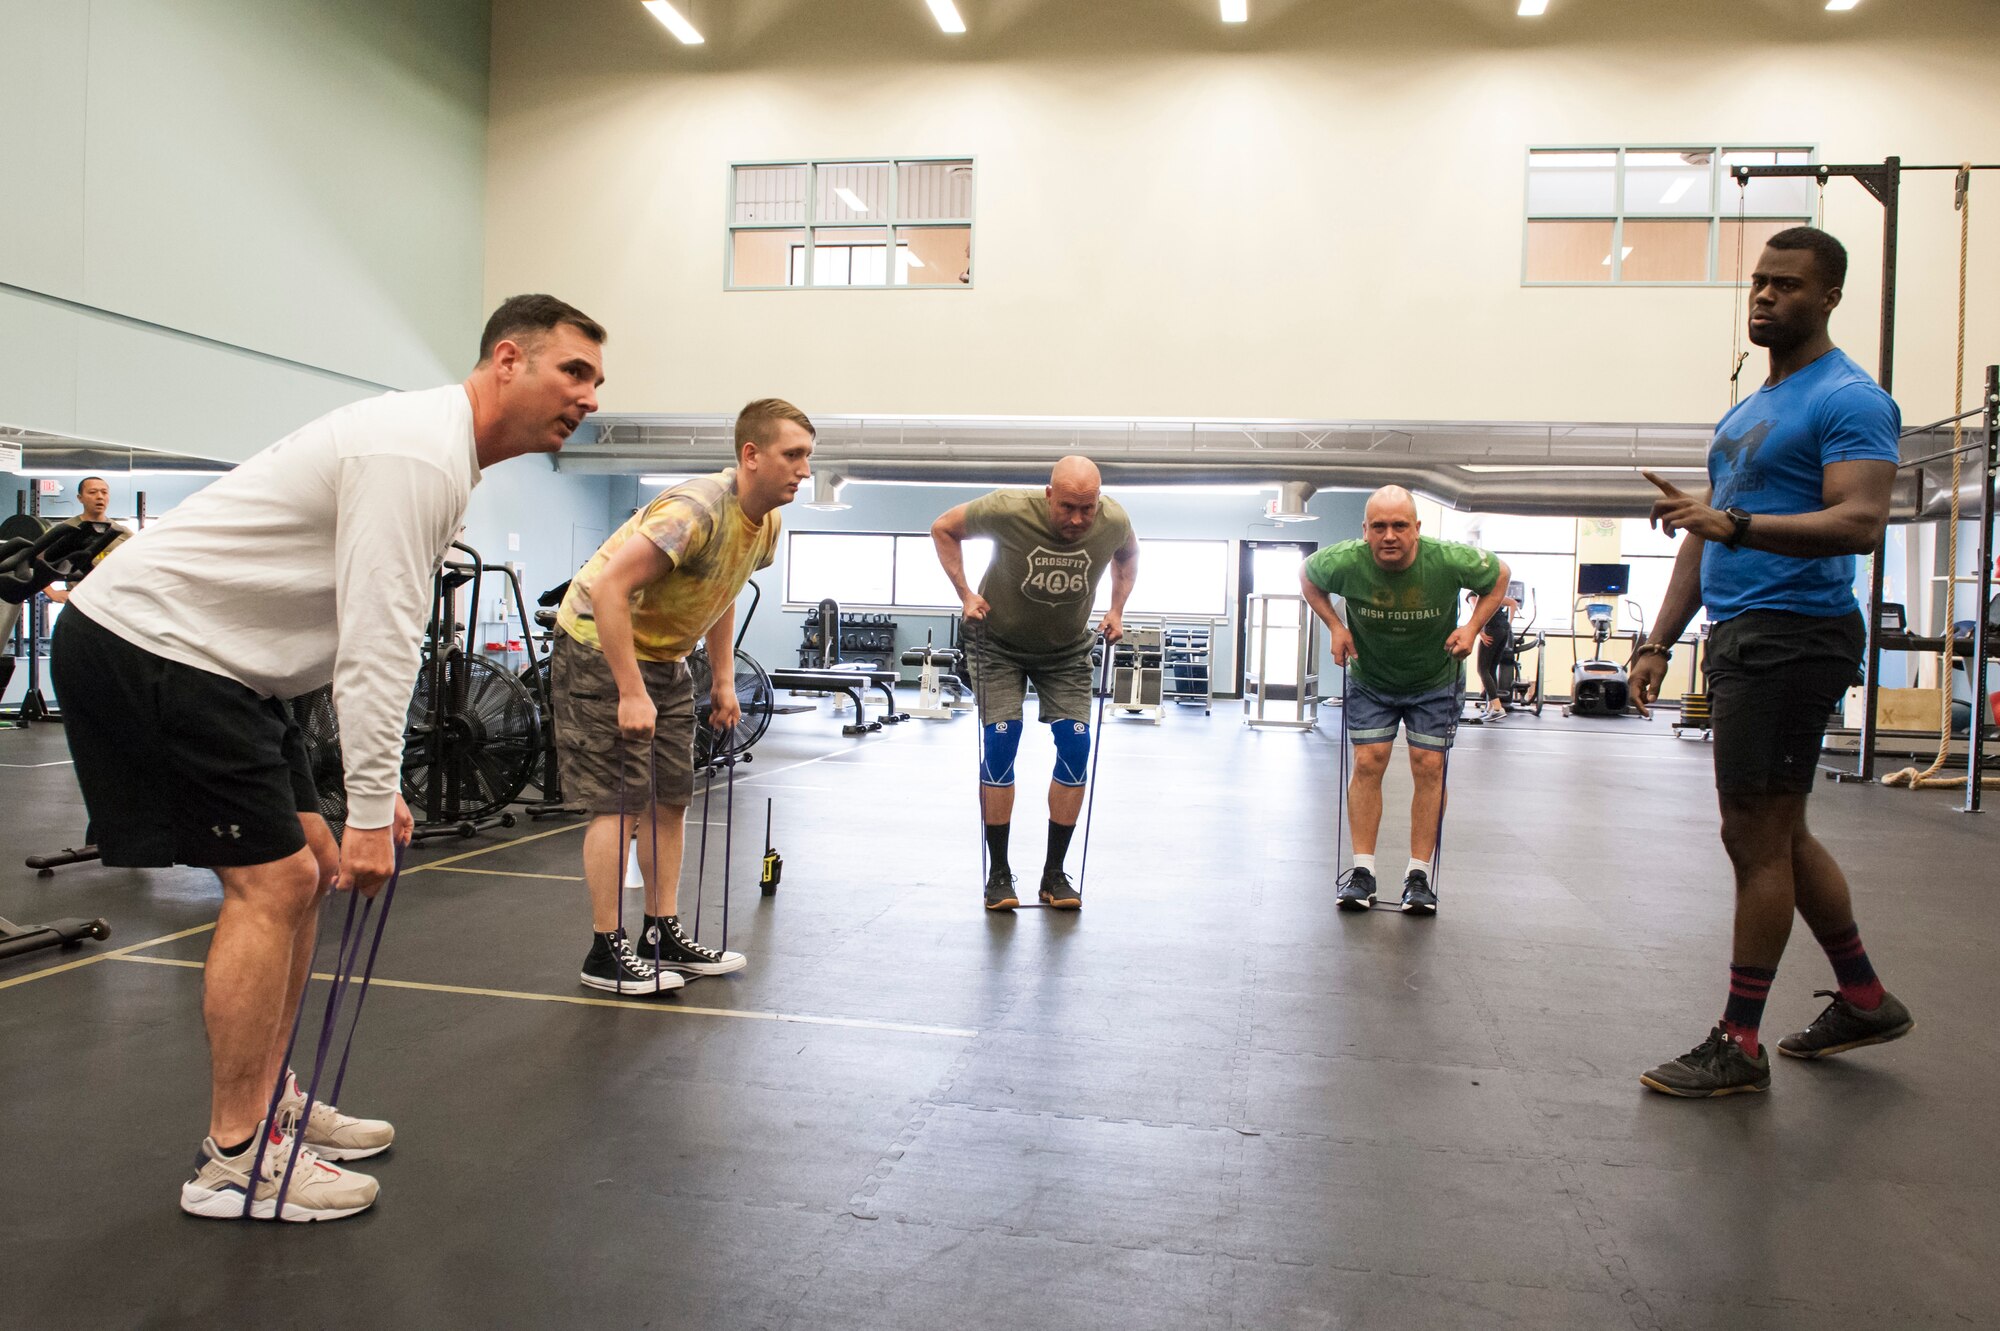 TJ Dunhart, 341st Force Support Squadron Fitness Center director instructs a “Wing One” fitness class in pre-workout stretches April 29, 2019, at Malmstrom Air Force Base, Mont.